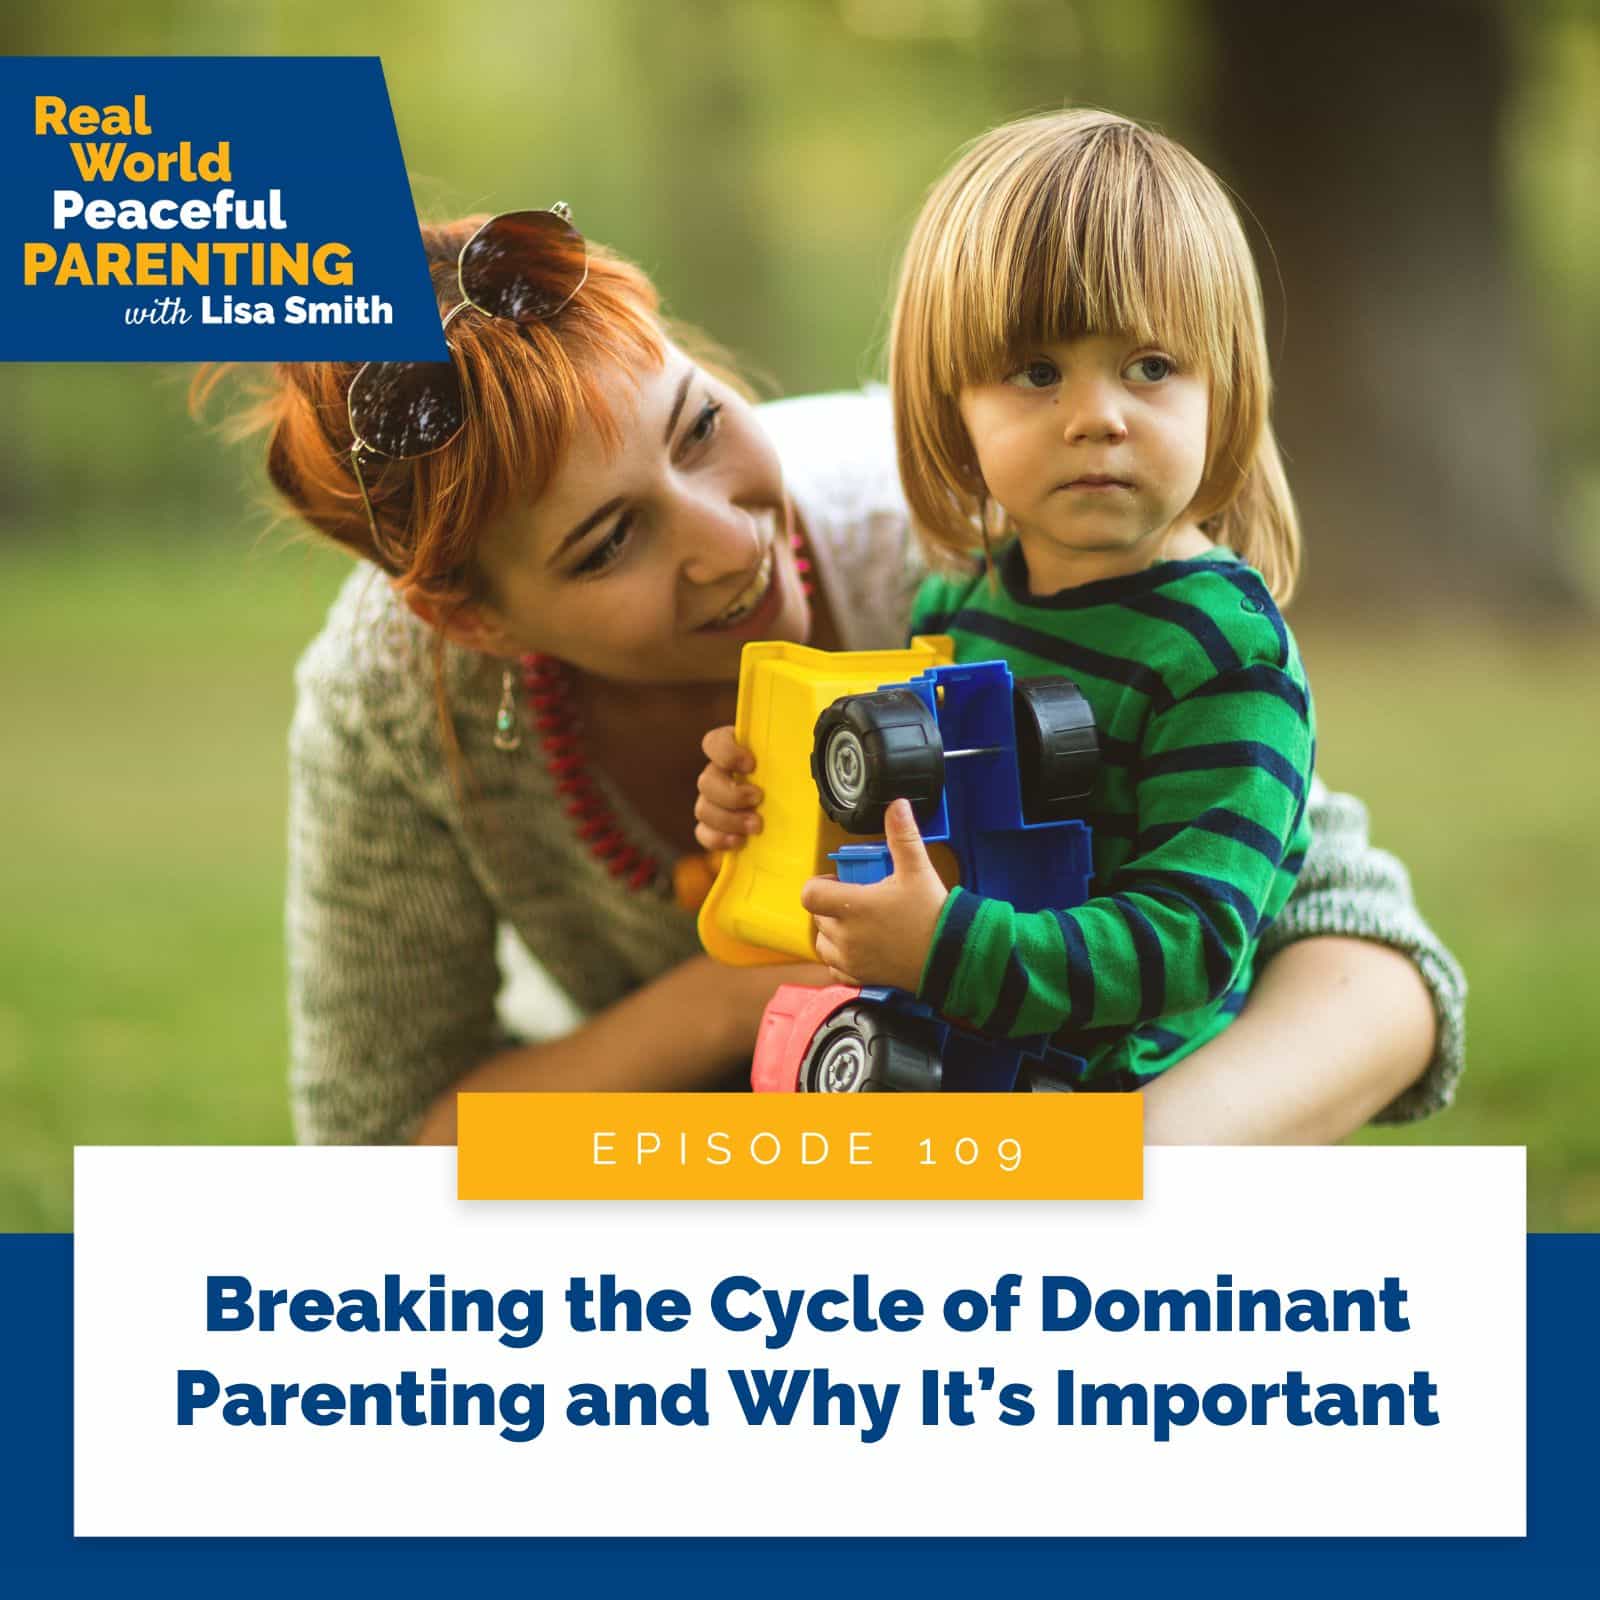 Real World Peaceful Parenting Lisa Smith | Breaking the Cycle of Dominant Parenting and Why It’s Important